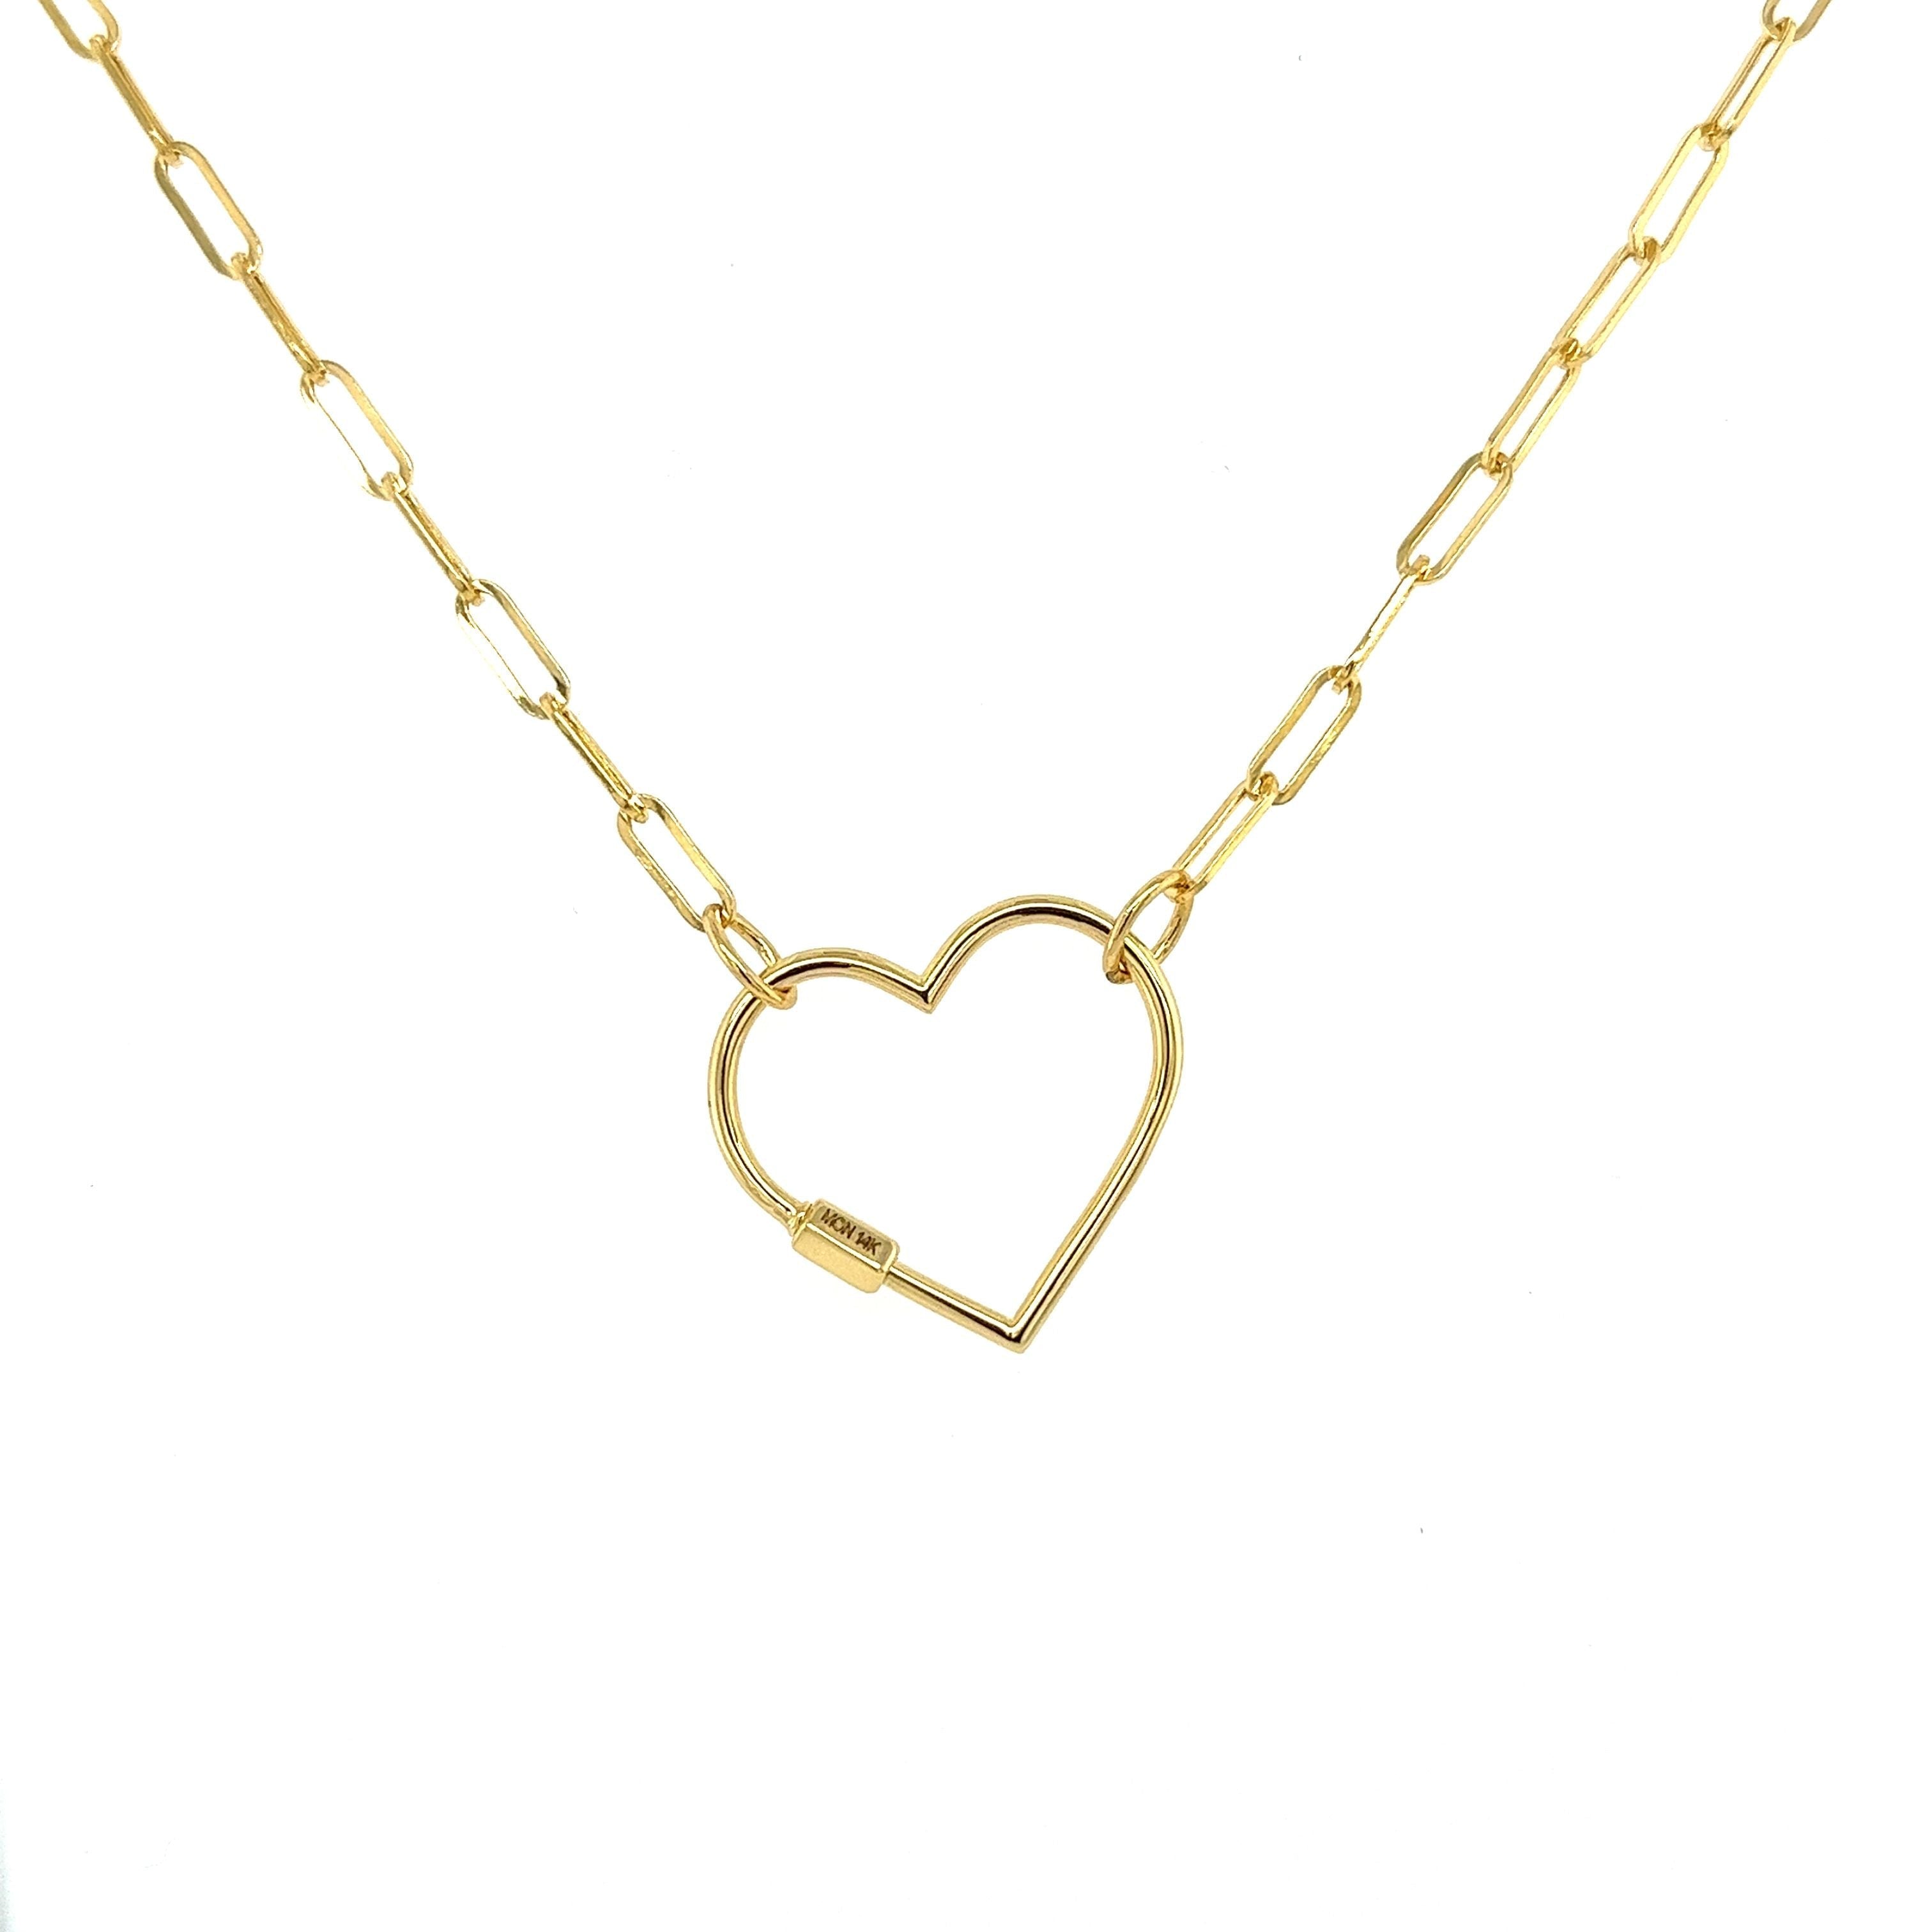 Heart Charm Lock Necklace with Diamonds - 14k Solid Gold